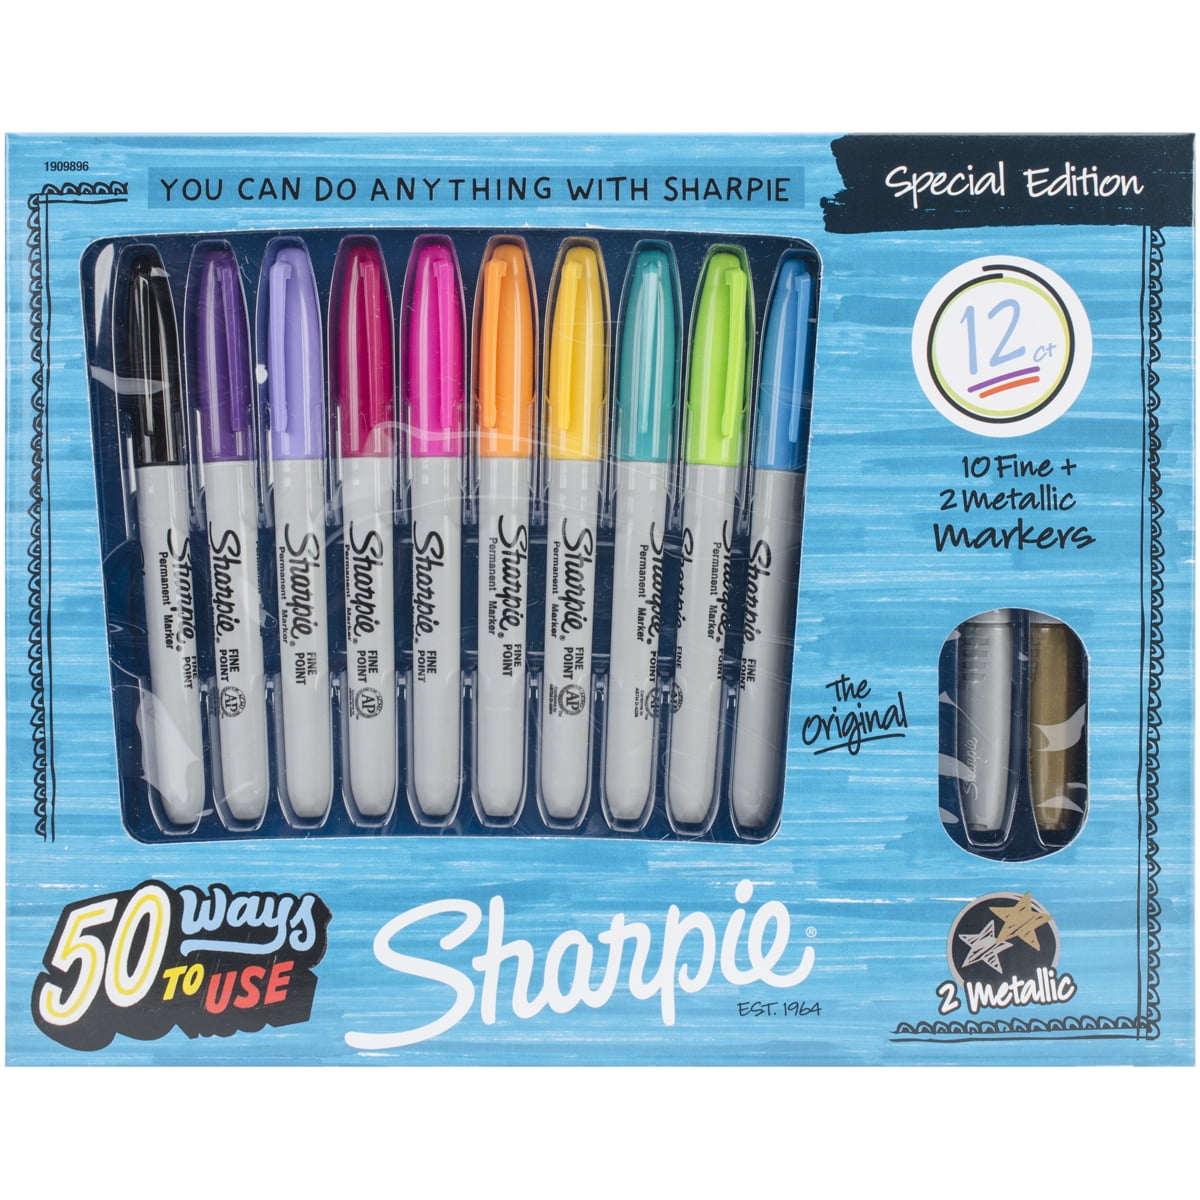 Sharpie Permanent Markers, Fine Point, Assorted Colors, 12 Count